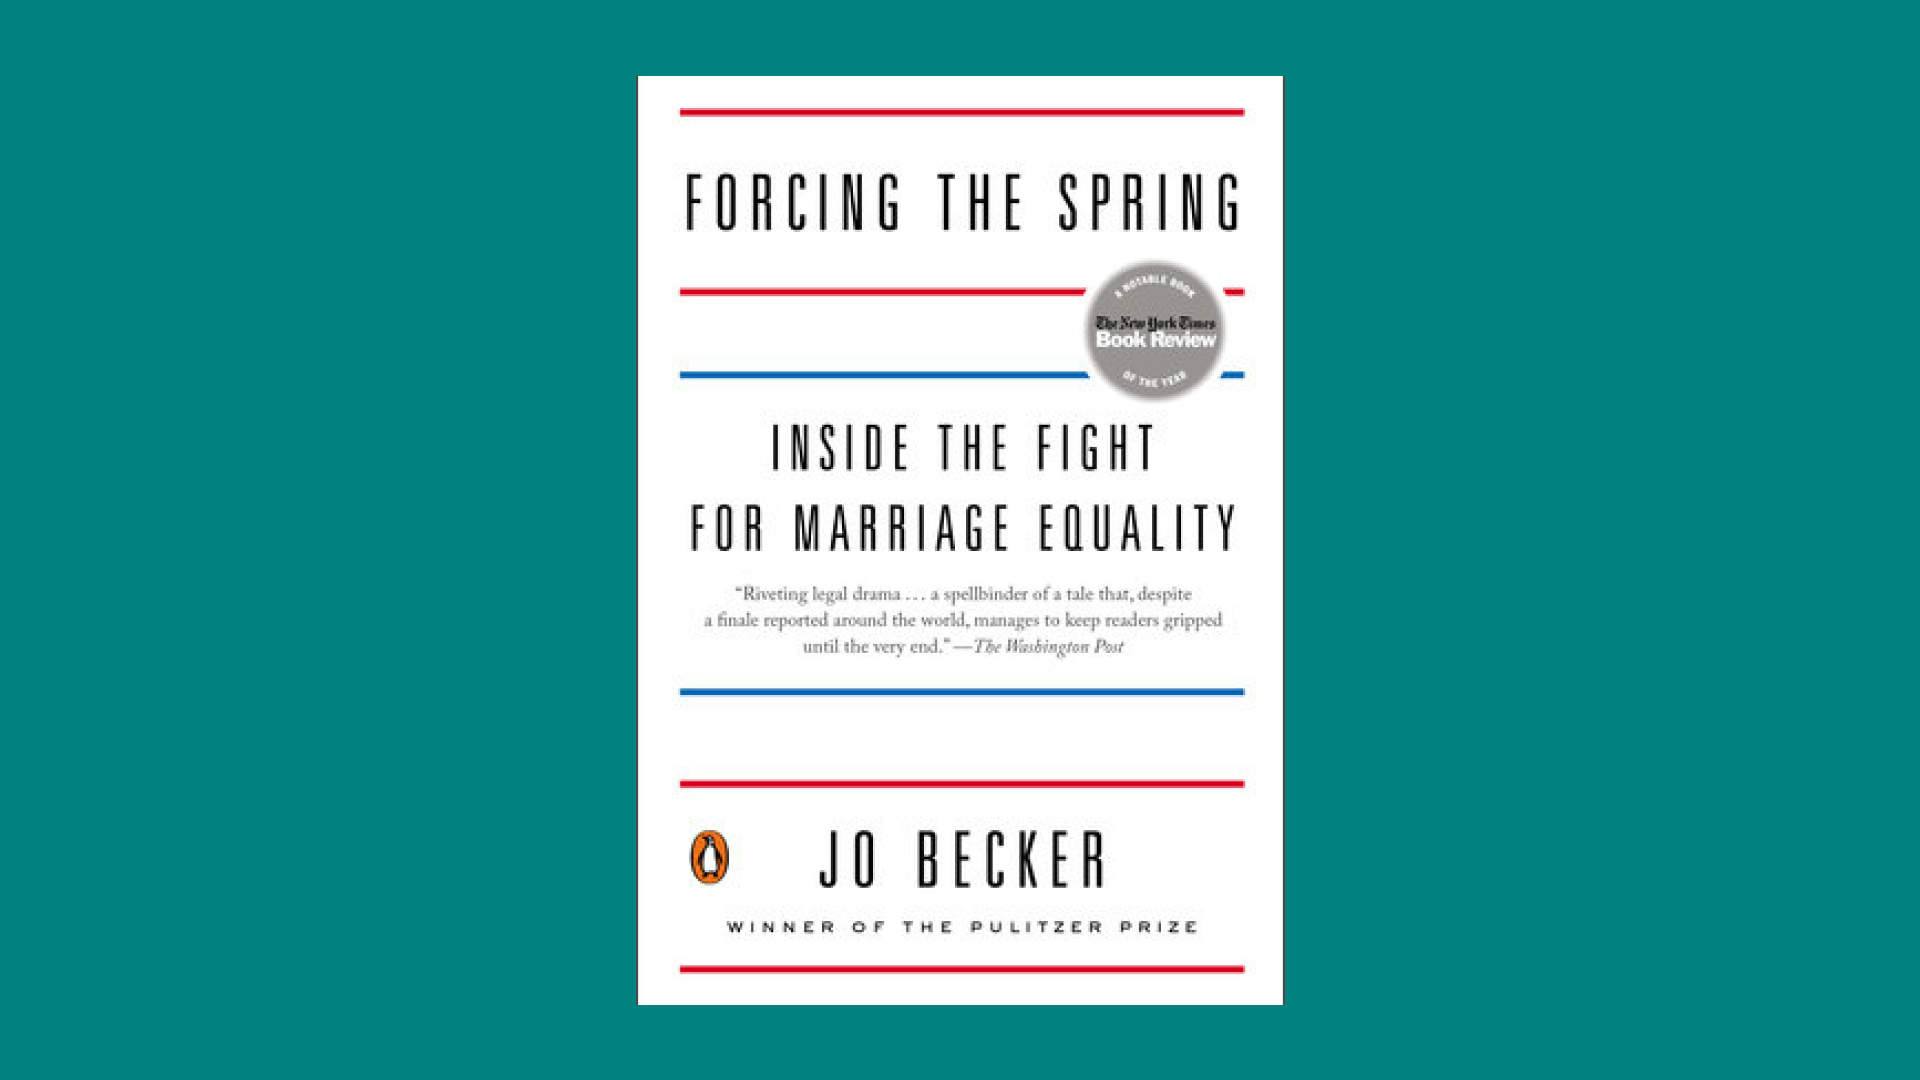 “Forcing the Spring” by Jo Becker